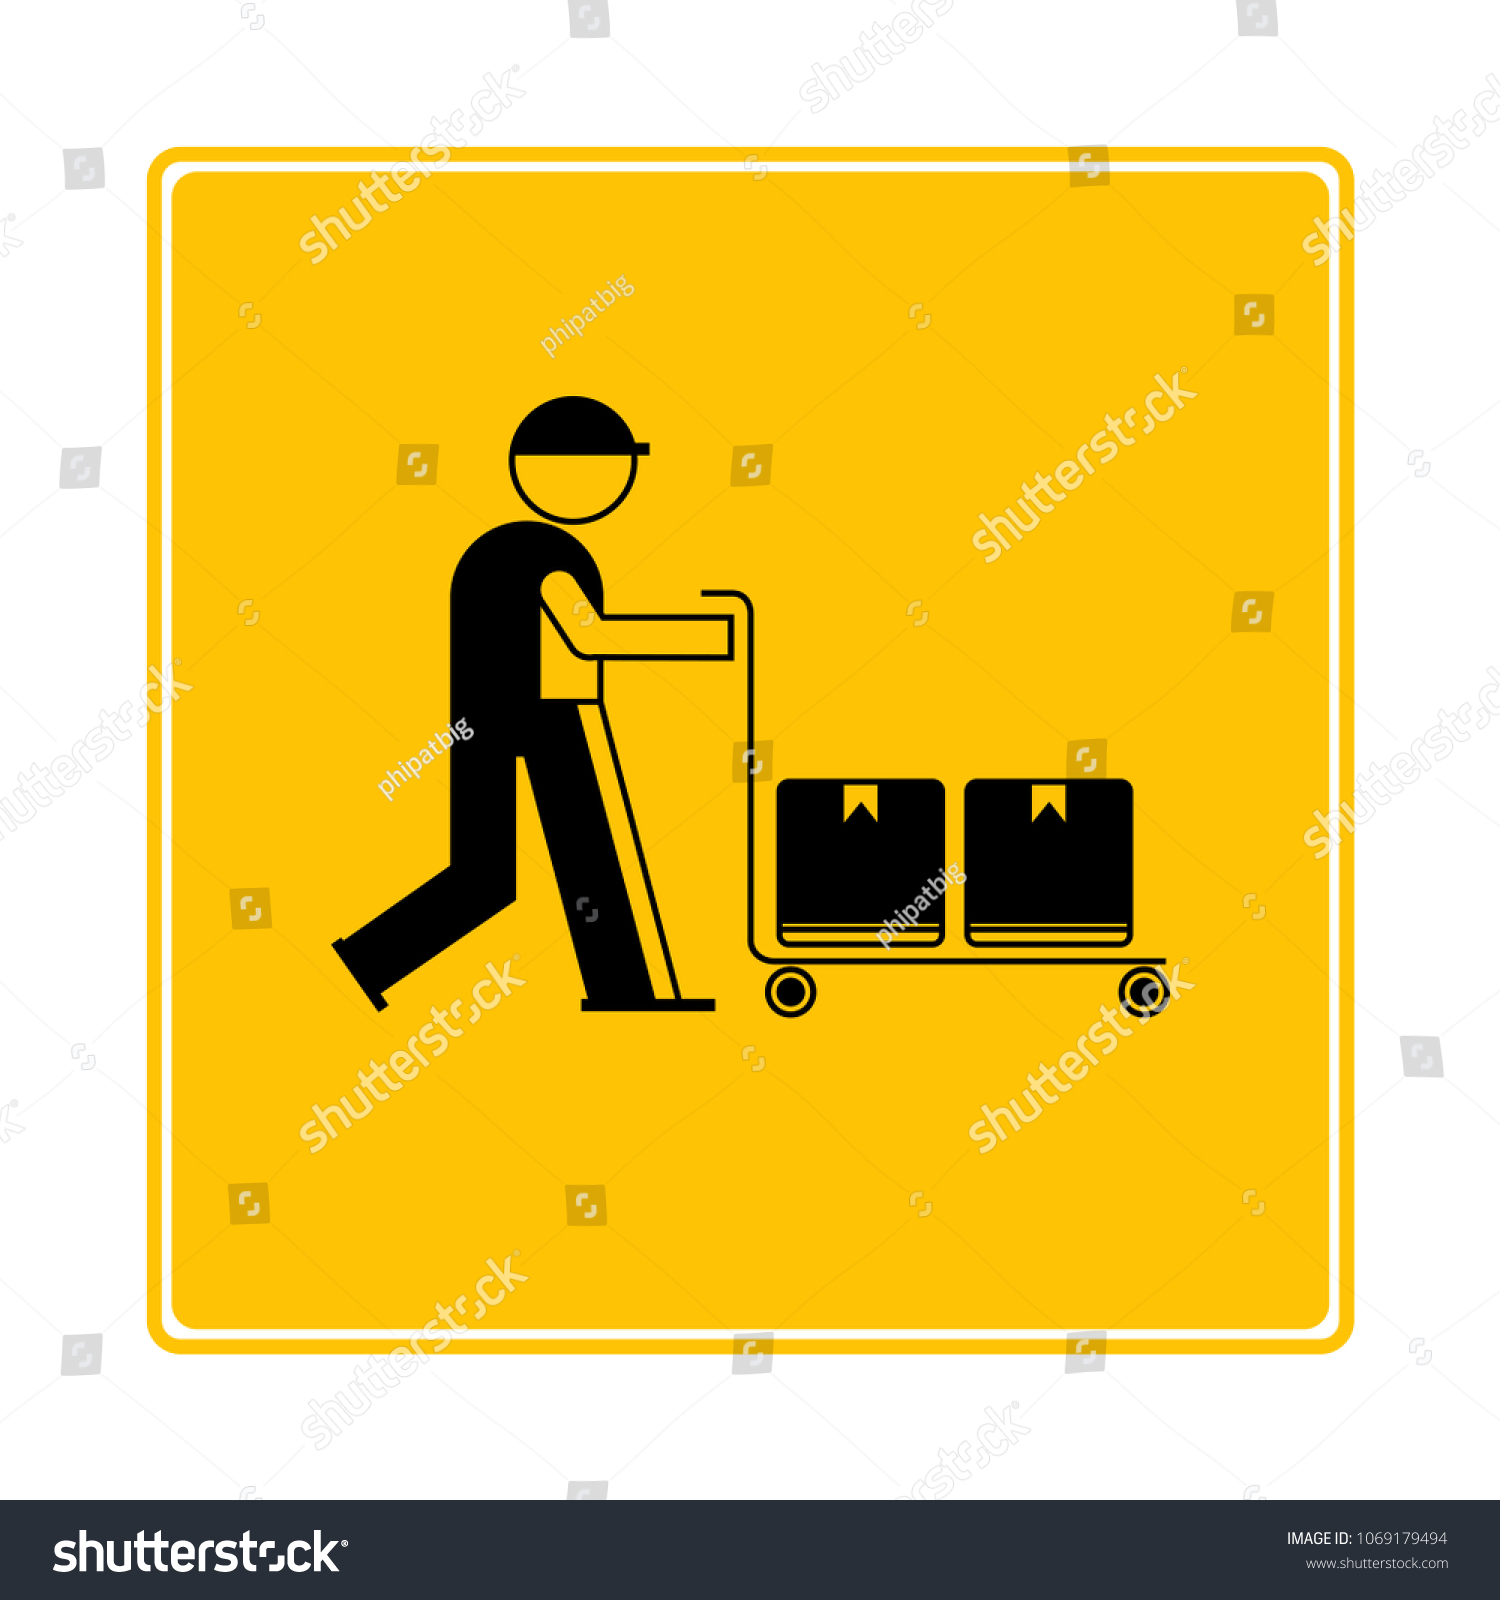 Download Warehouse Worker Trolley Boxes Icon Yellow Stock Vector Royalty Free 1069179494 PSD Mockup Templates